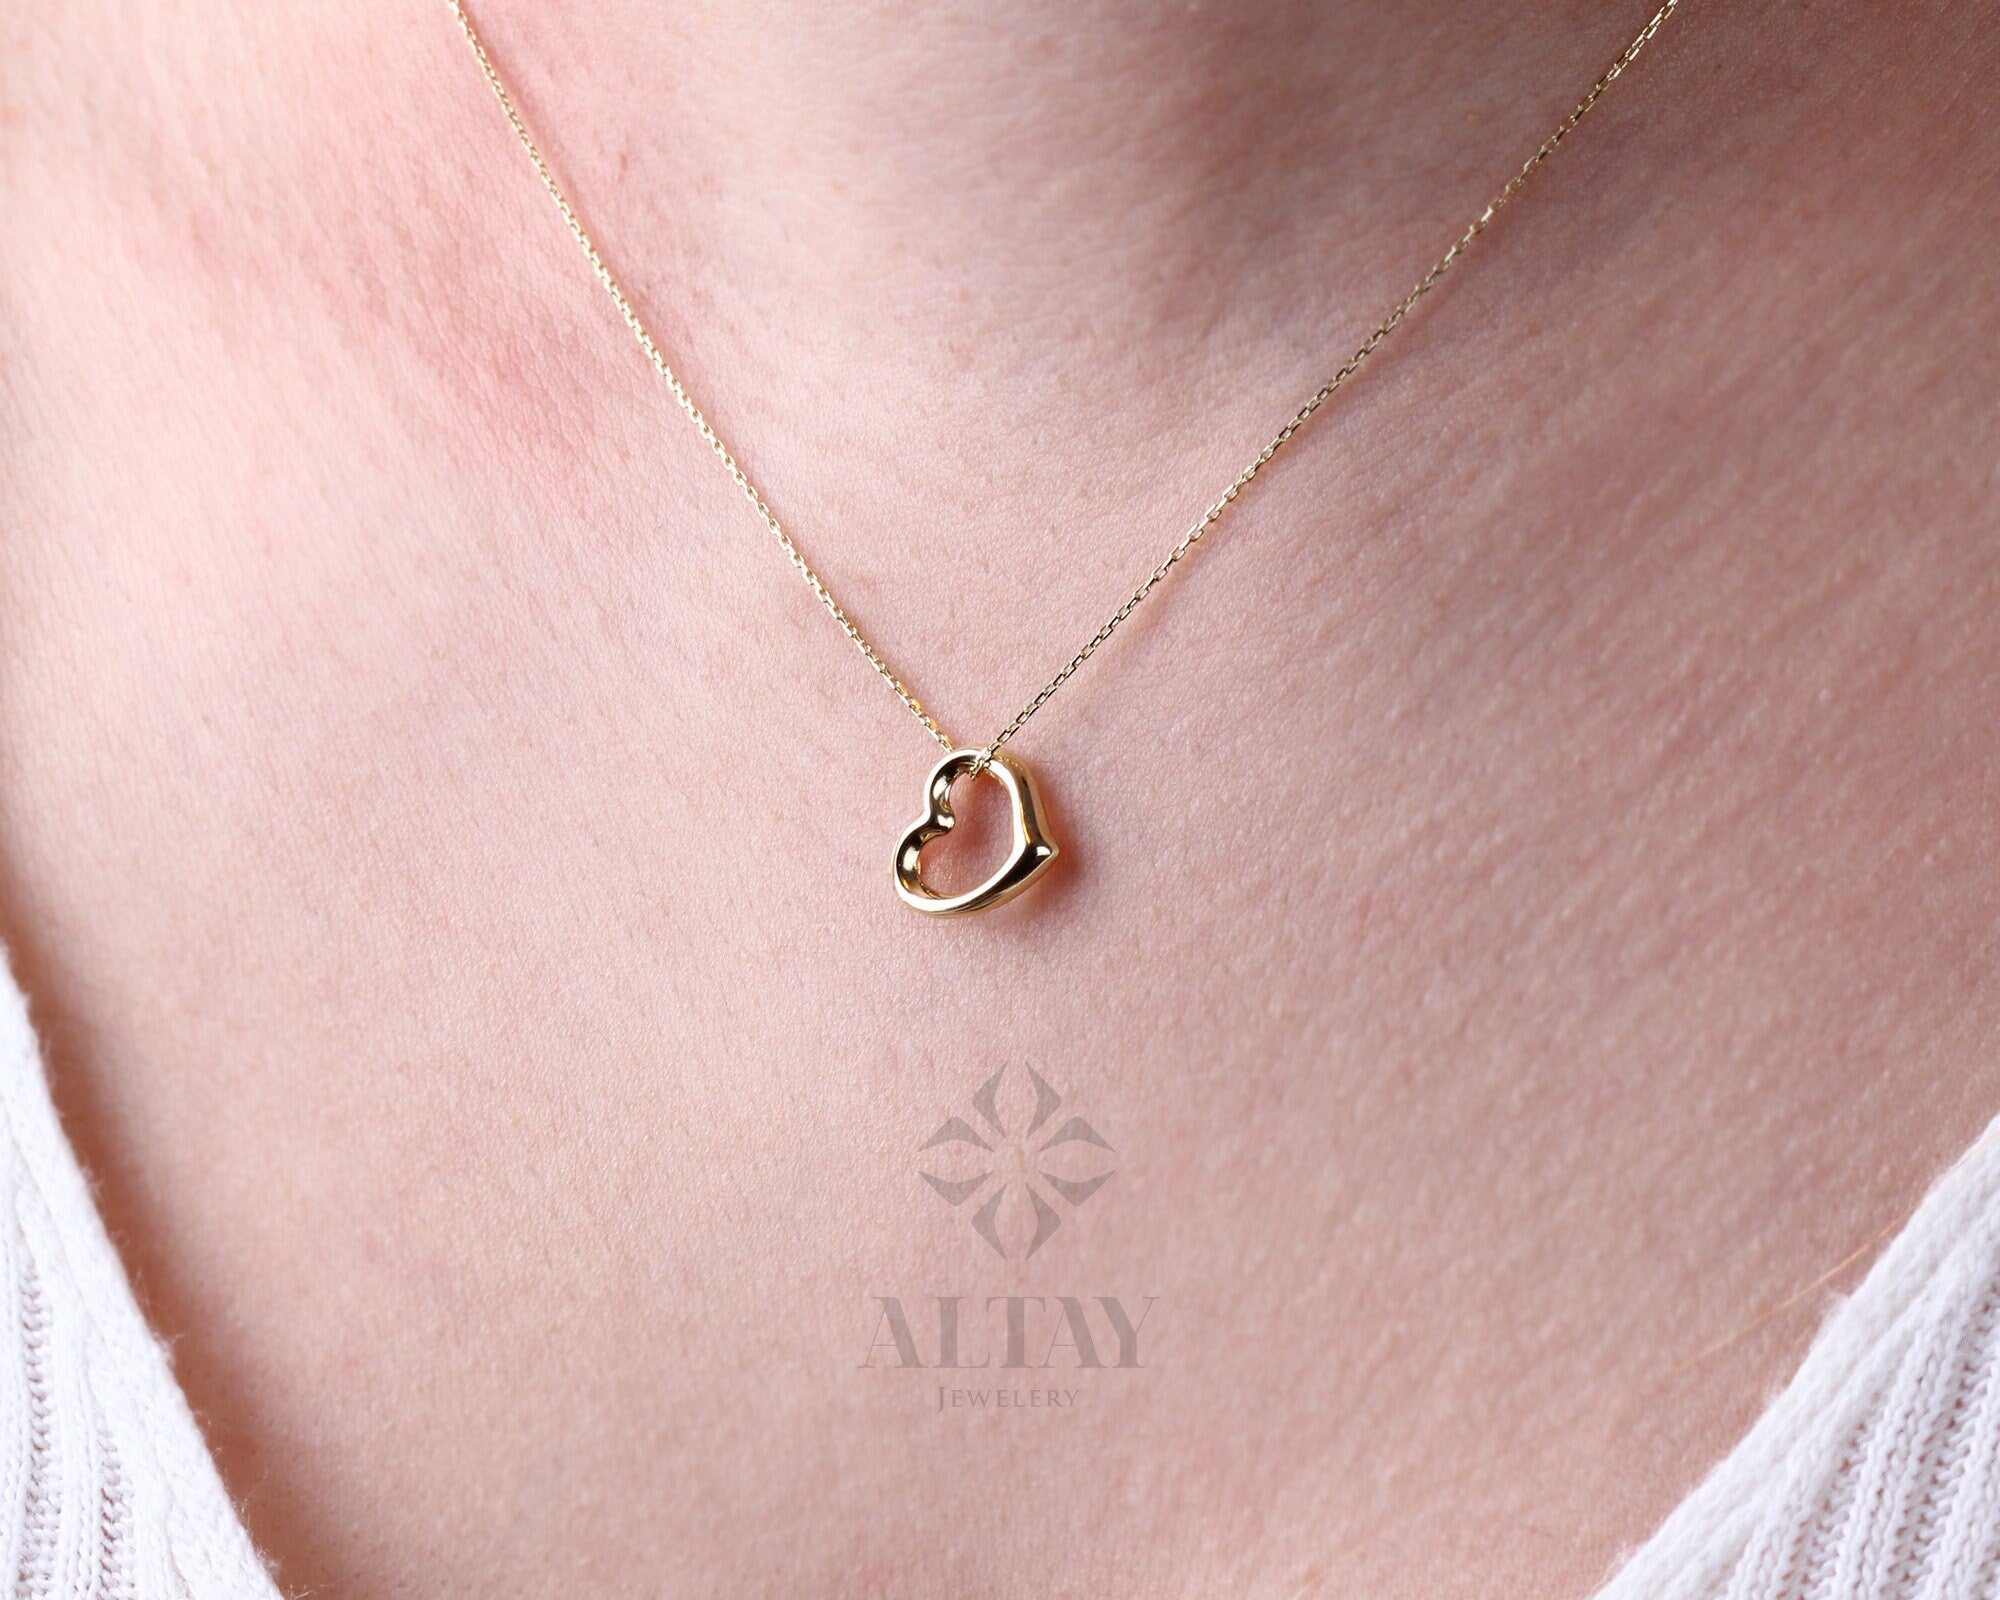 14K Gold Heart Necklace, Small Heart Necklace, Mini Heart Pendant, Heart Real Gold Charm, Love Pendant Necklace, Gift for Her